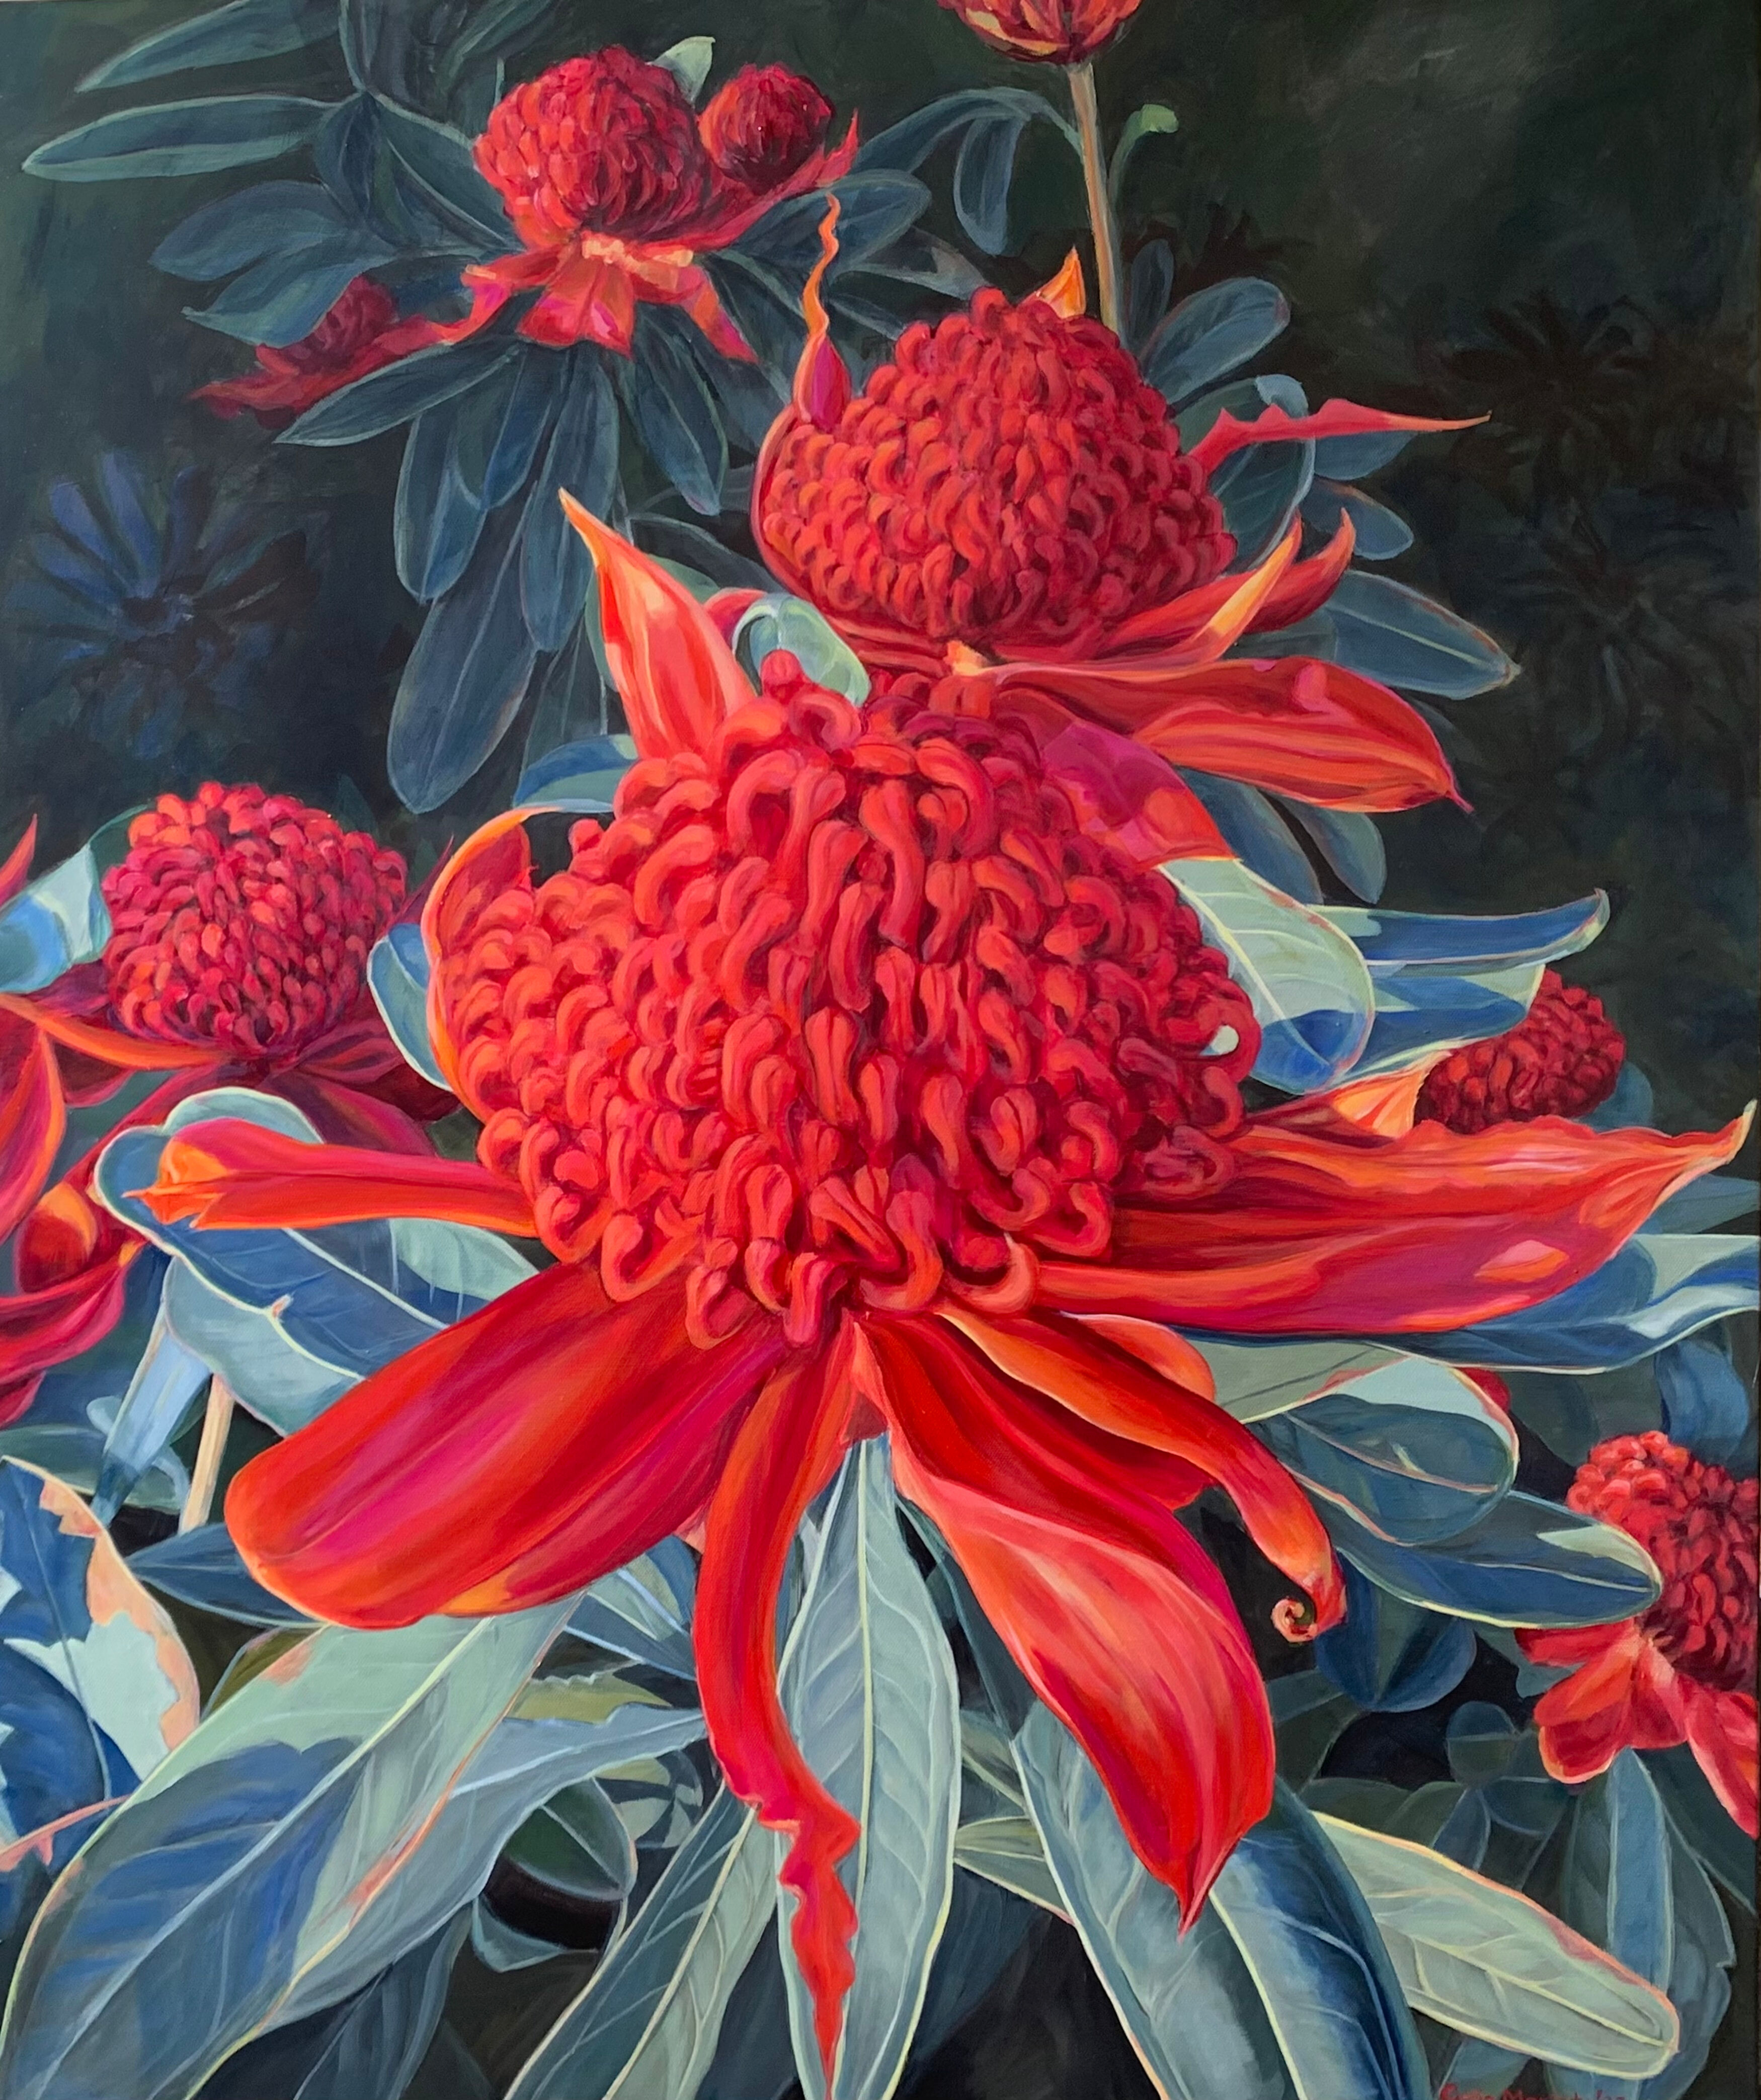 Waratah in the Front Yard 2022 Acrylic on canvas 91.4 x 76.2 cm Image courstesy of Celia Moriarty - Celia Moriarty